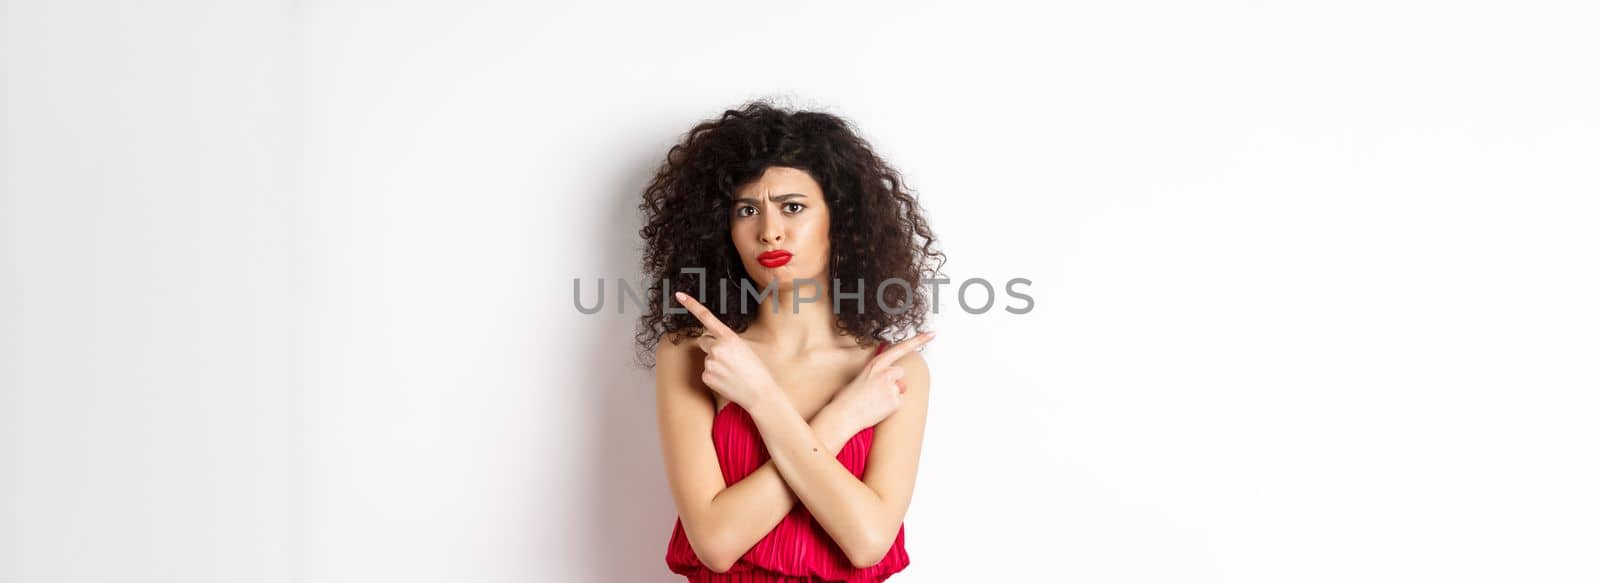 Doubtful and sad young woman in red dress, pointing fingers sideways and sulking, cant decide between products, need help with choice, standing over white background.